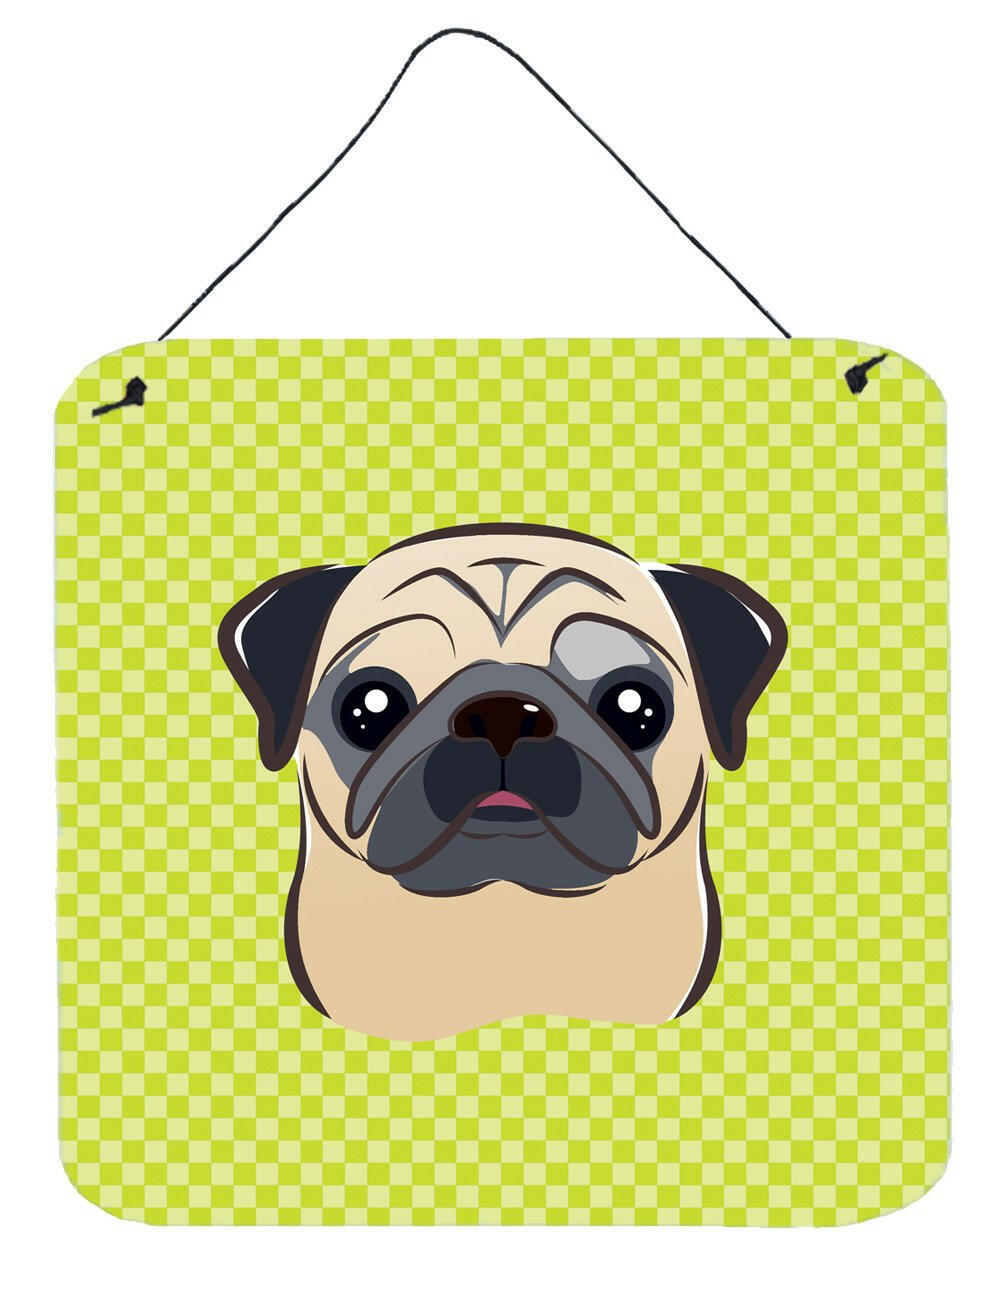 Checkerboard Lime Green Fawn Pug Wall or Door Hanging Prints BB1324DS66 by Caroline's Treasures